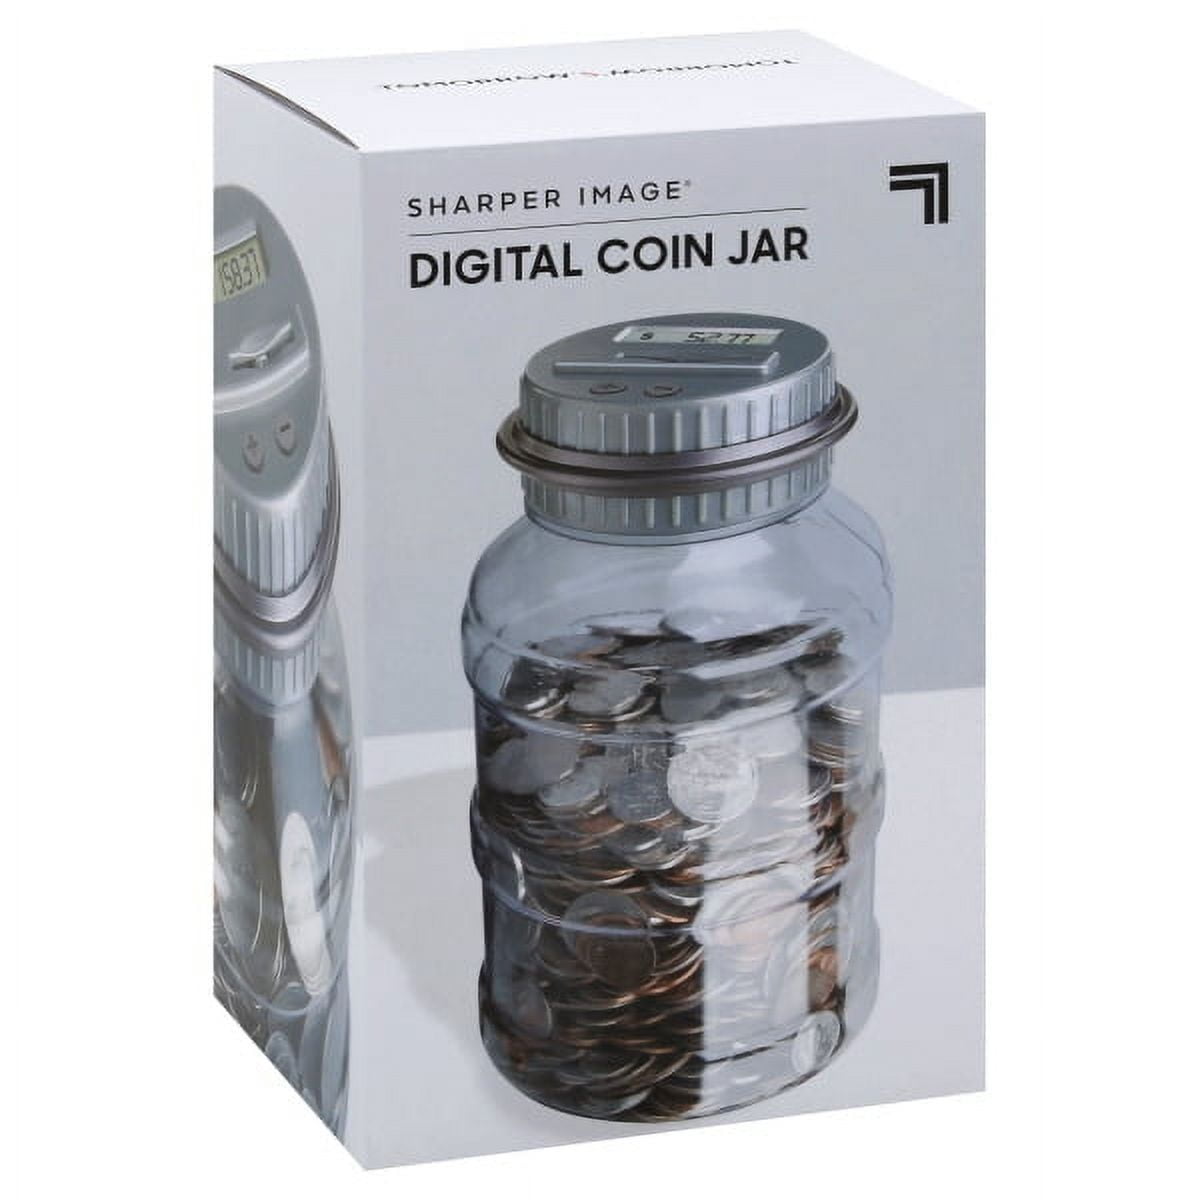 M&R Digital Counting Coin Bank. Batteries Included! Personal Coin Counter/Money Clear Jar, Silver Top Totals Up Your Savings- Works with All U.S.